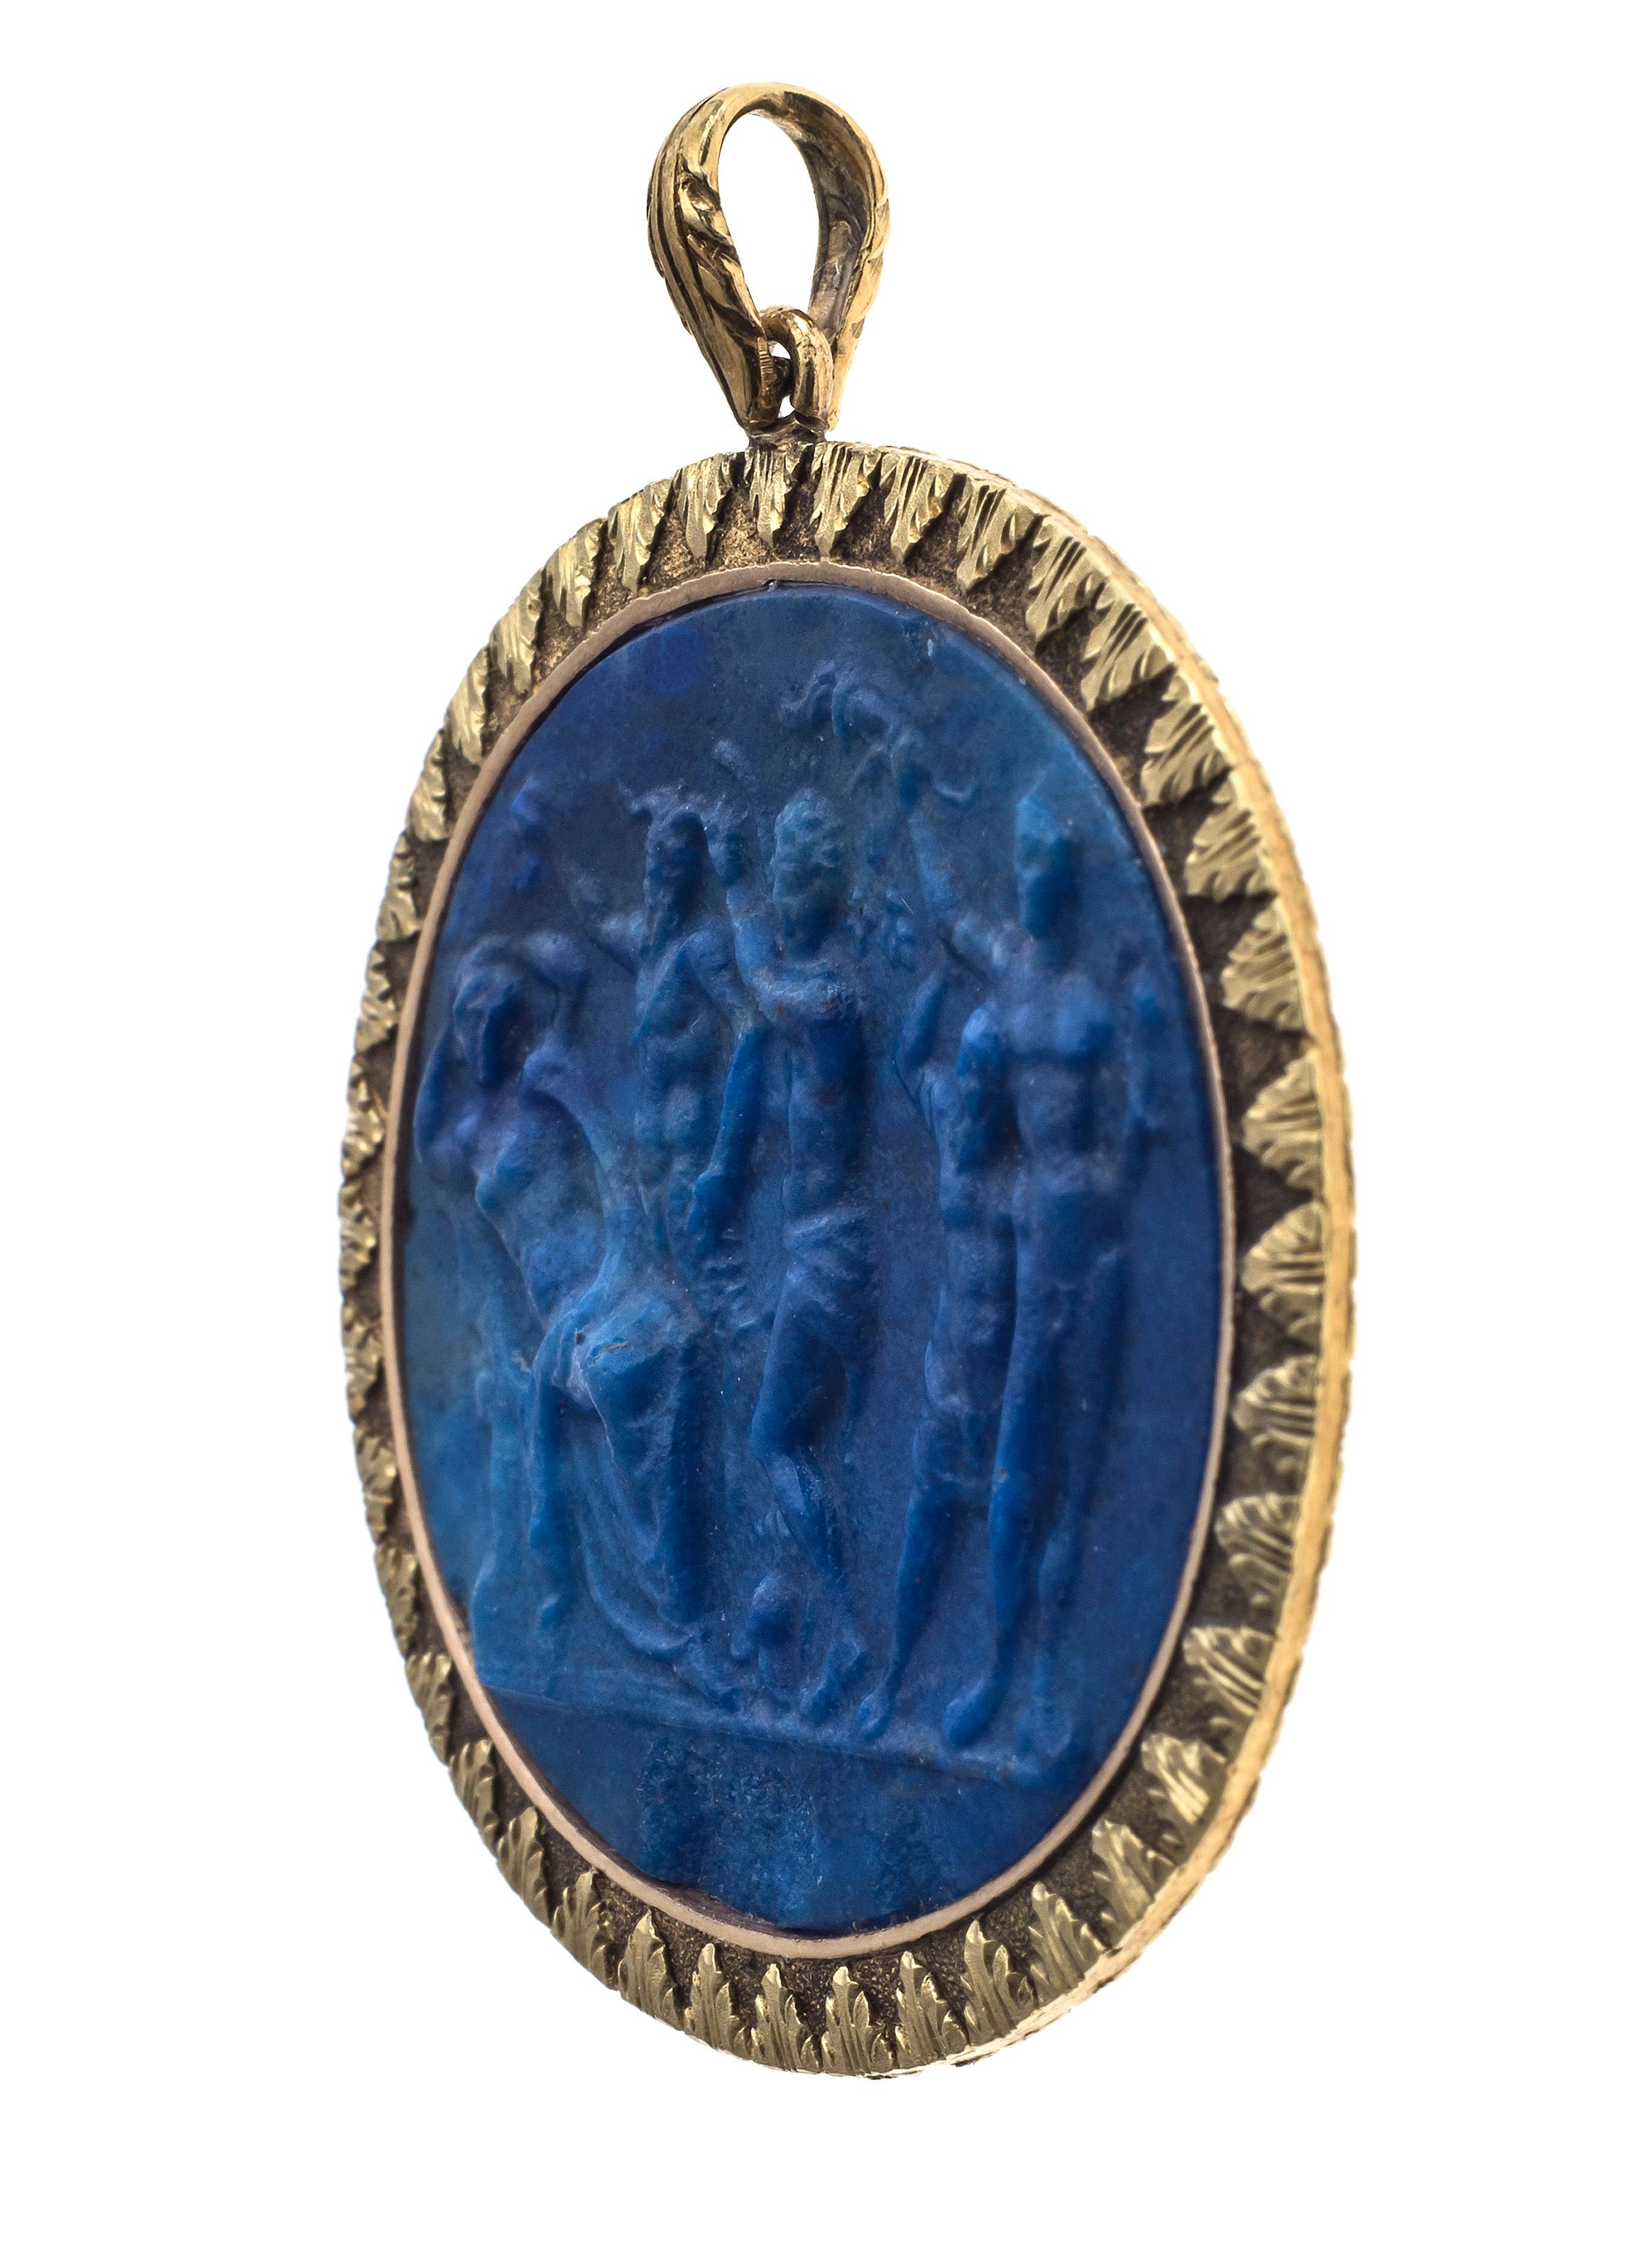 Magnificent extremely rare double-sided carved lapis lazuli cameo pendant. The exquisite carving is mounted in a fine 18K gold frame that is decorated with chiselled acanthus leaves. Back and front show two different mythological themes. One side